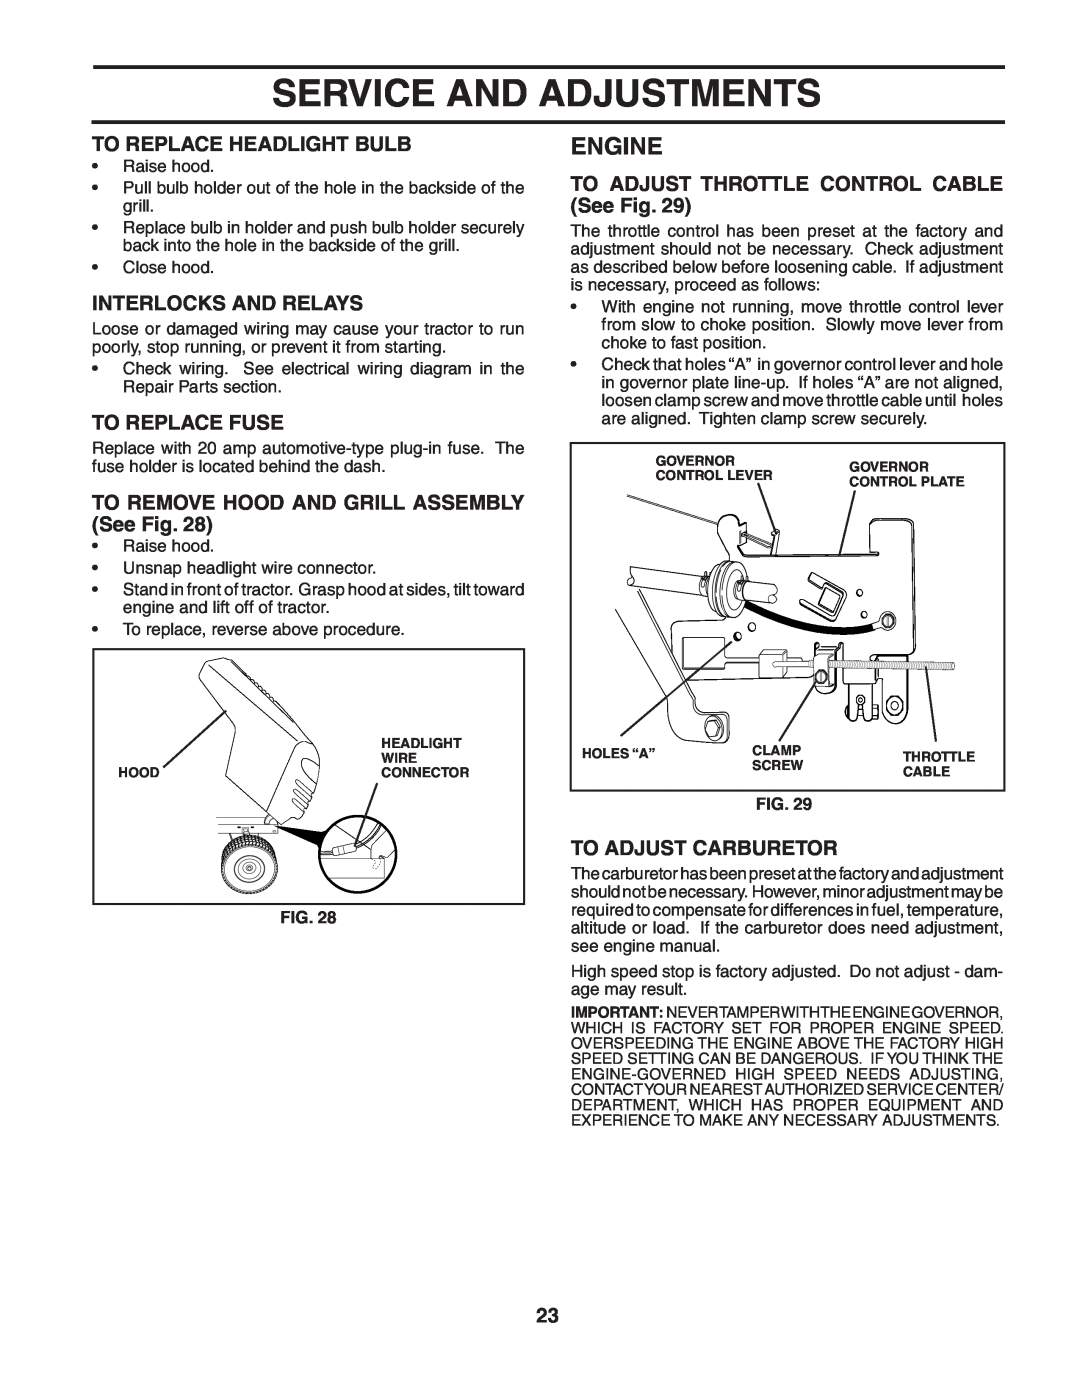 Poulan PO1742STC manual To Replace Headlight Bulb, Interlocks And Relays, To Replace Fuse, To Adjust Carburetor, Engine 